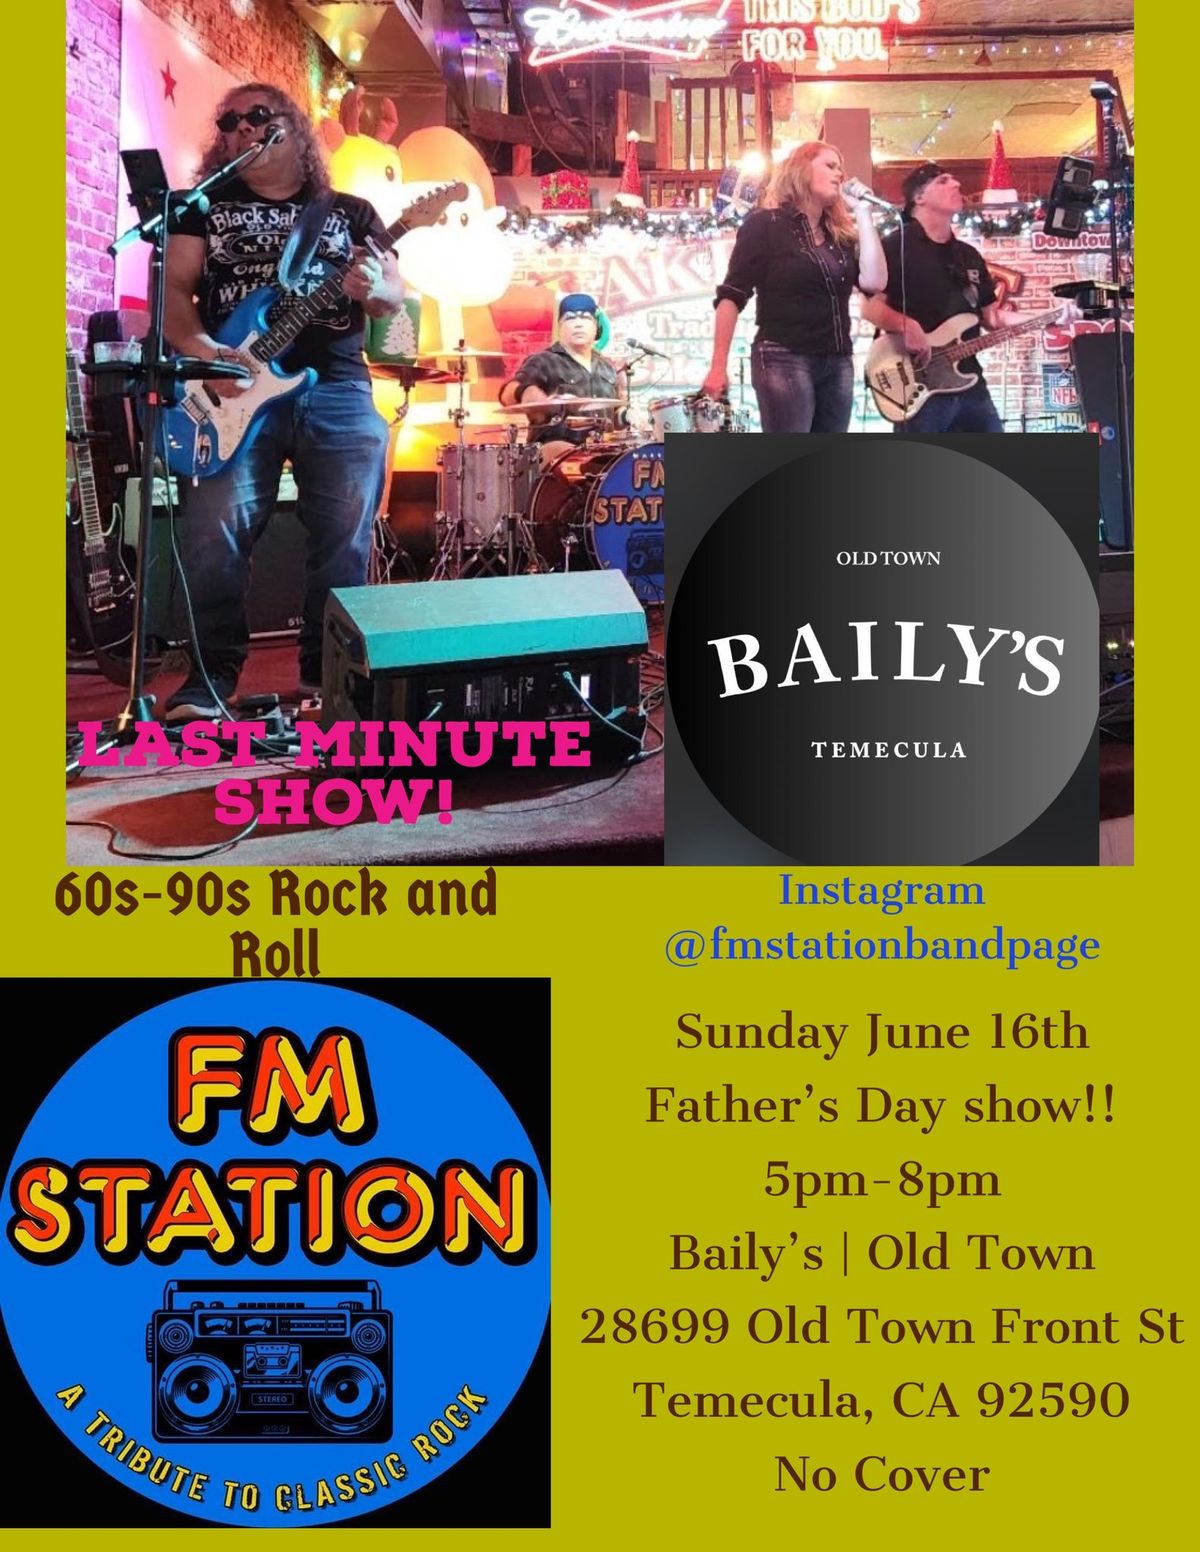 FM Station (60s-90s Classic Rock special Father\u2019s Day show at Baily's | Old Town Temecula